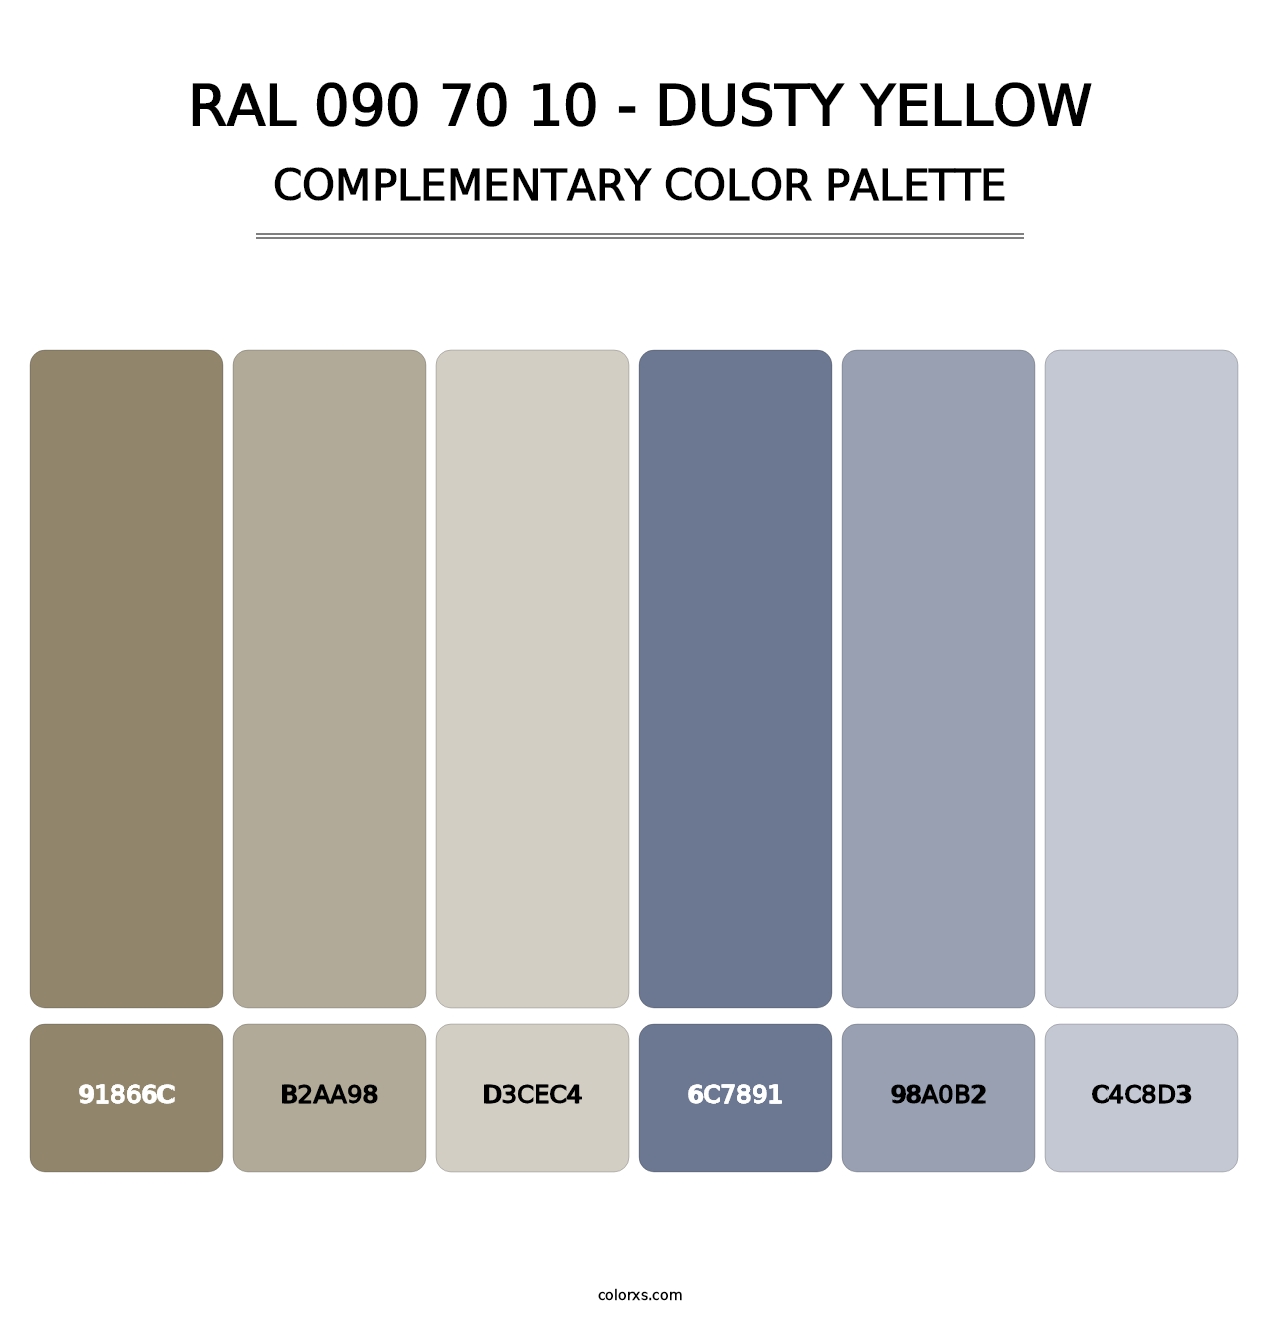 RAL 090 70 10 - Dusty Yellow - Complementary Color Palette